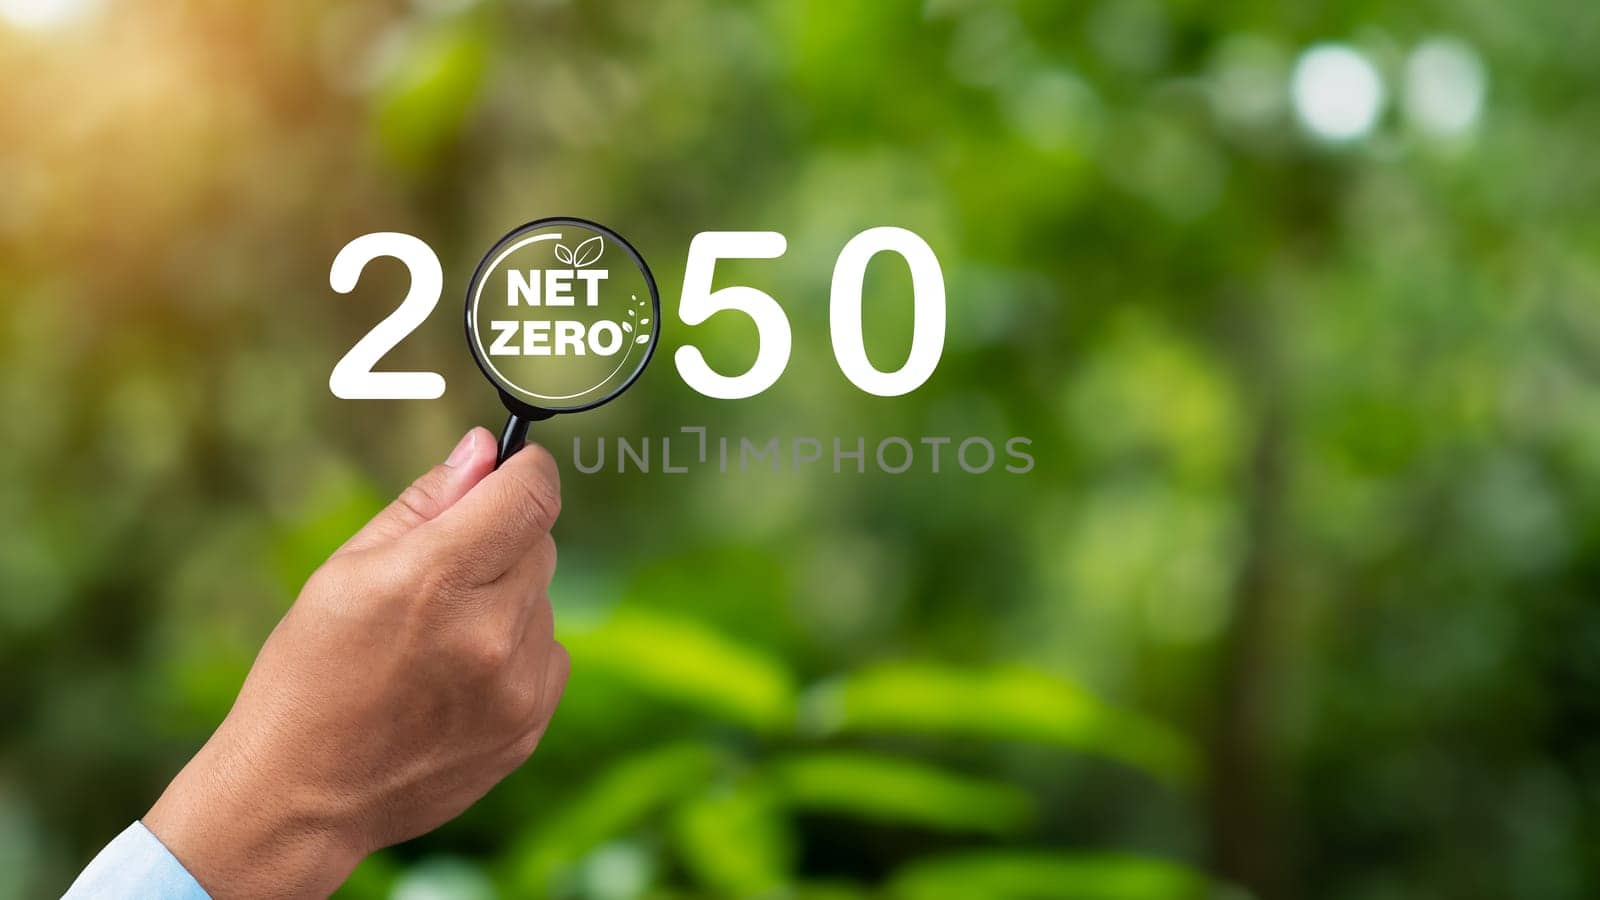 Net zero icon inside magnifier glass, Net zero greenhouse gas emissions target, Carbon neutral and net zero concept, Natural environment Climate-neutral long-term strategy. 